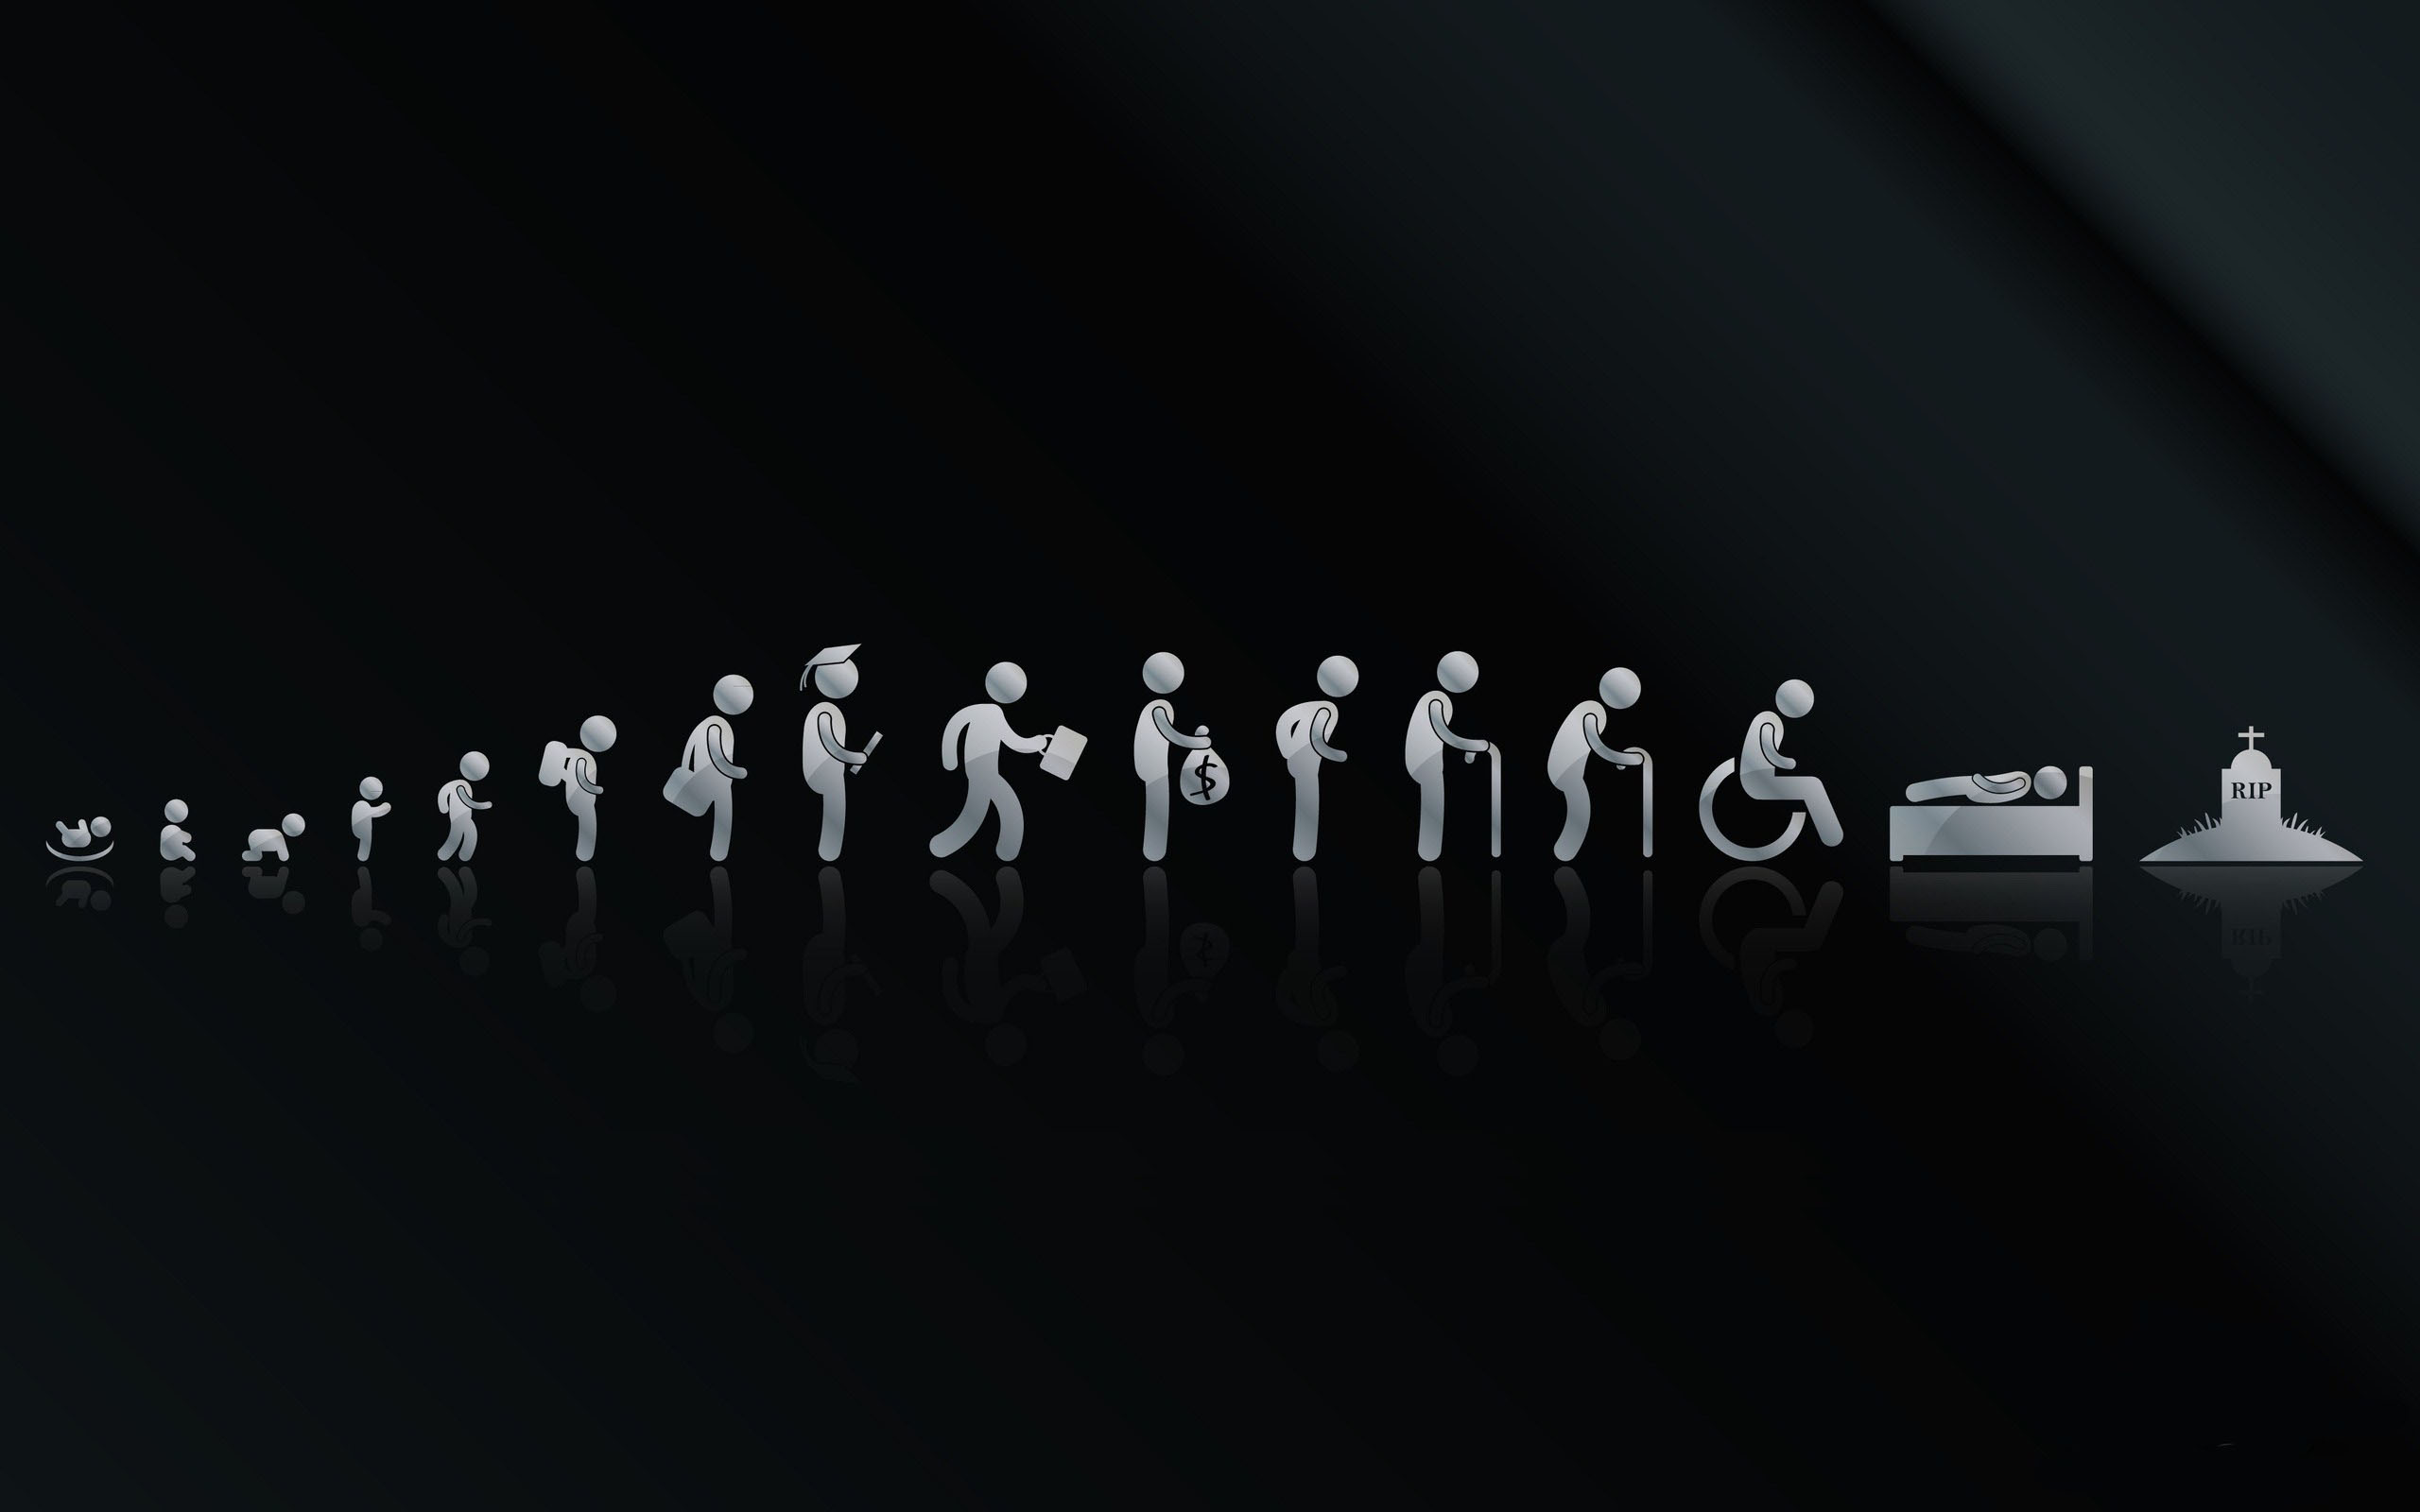 Life Cycle Wallpaper Free Life Cycle Background